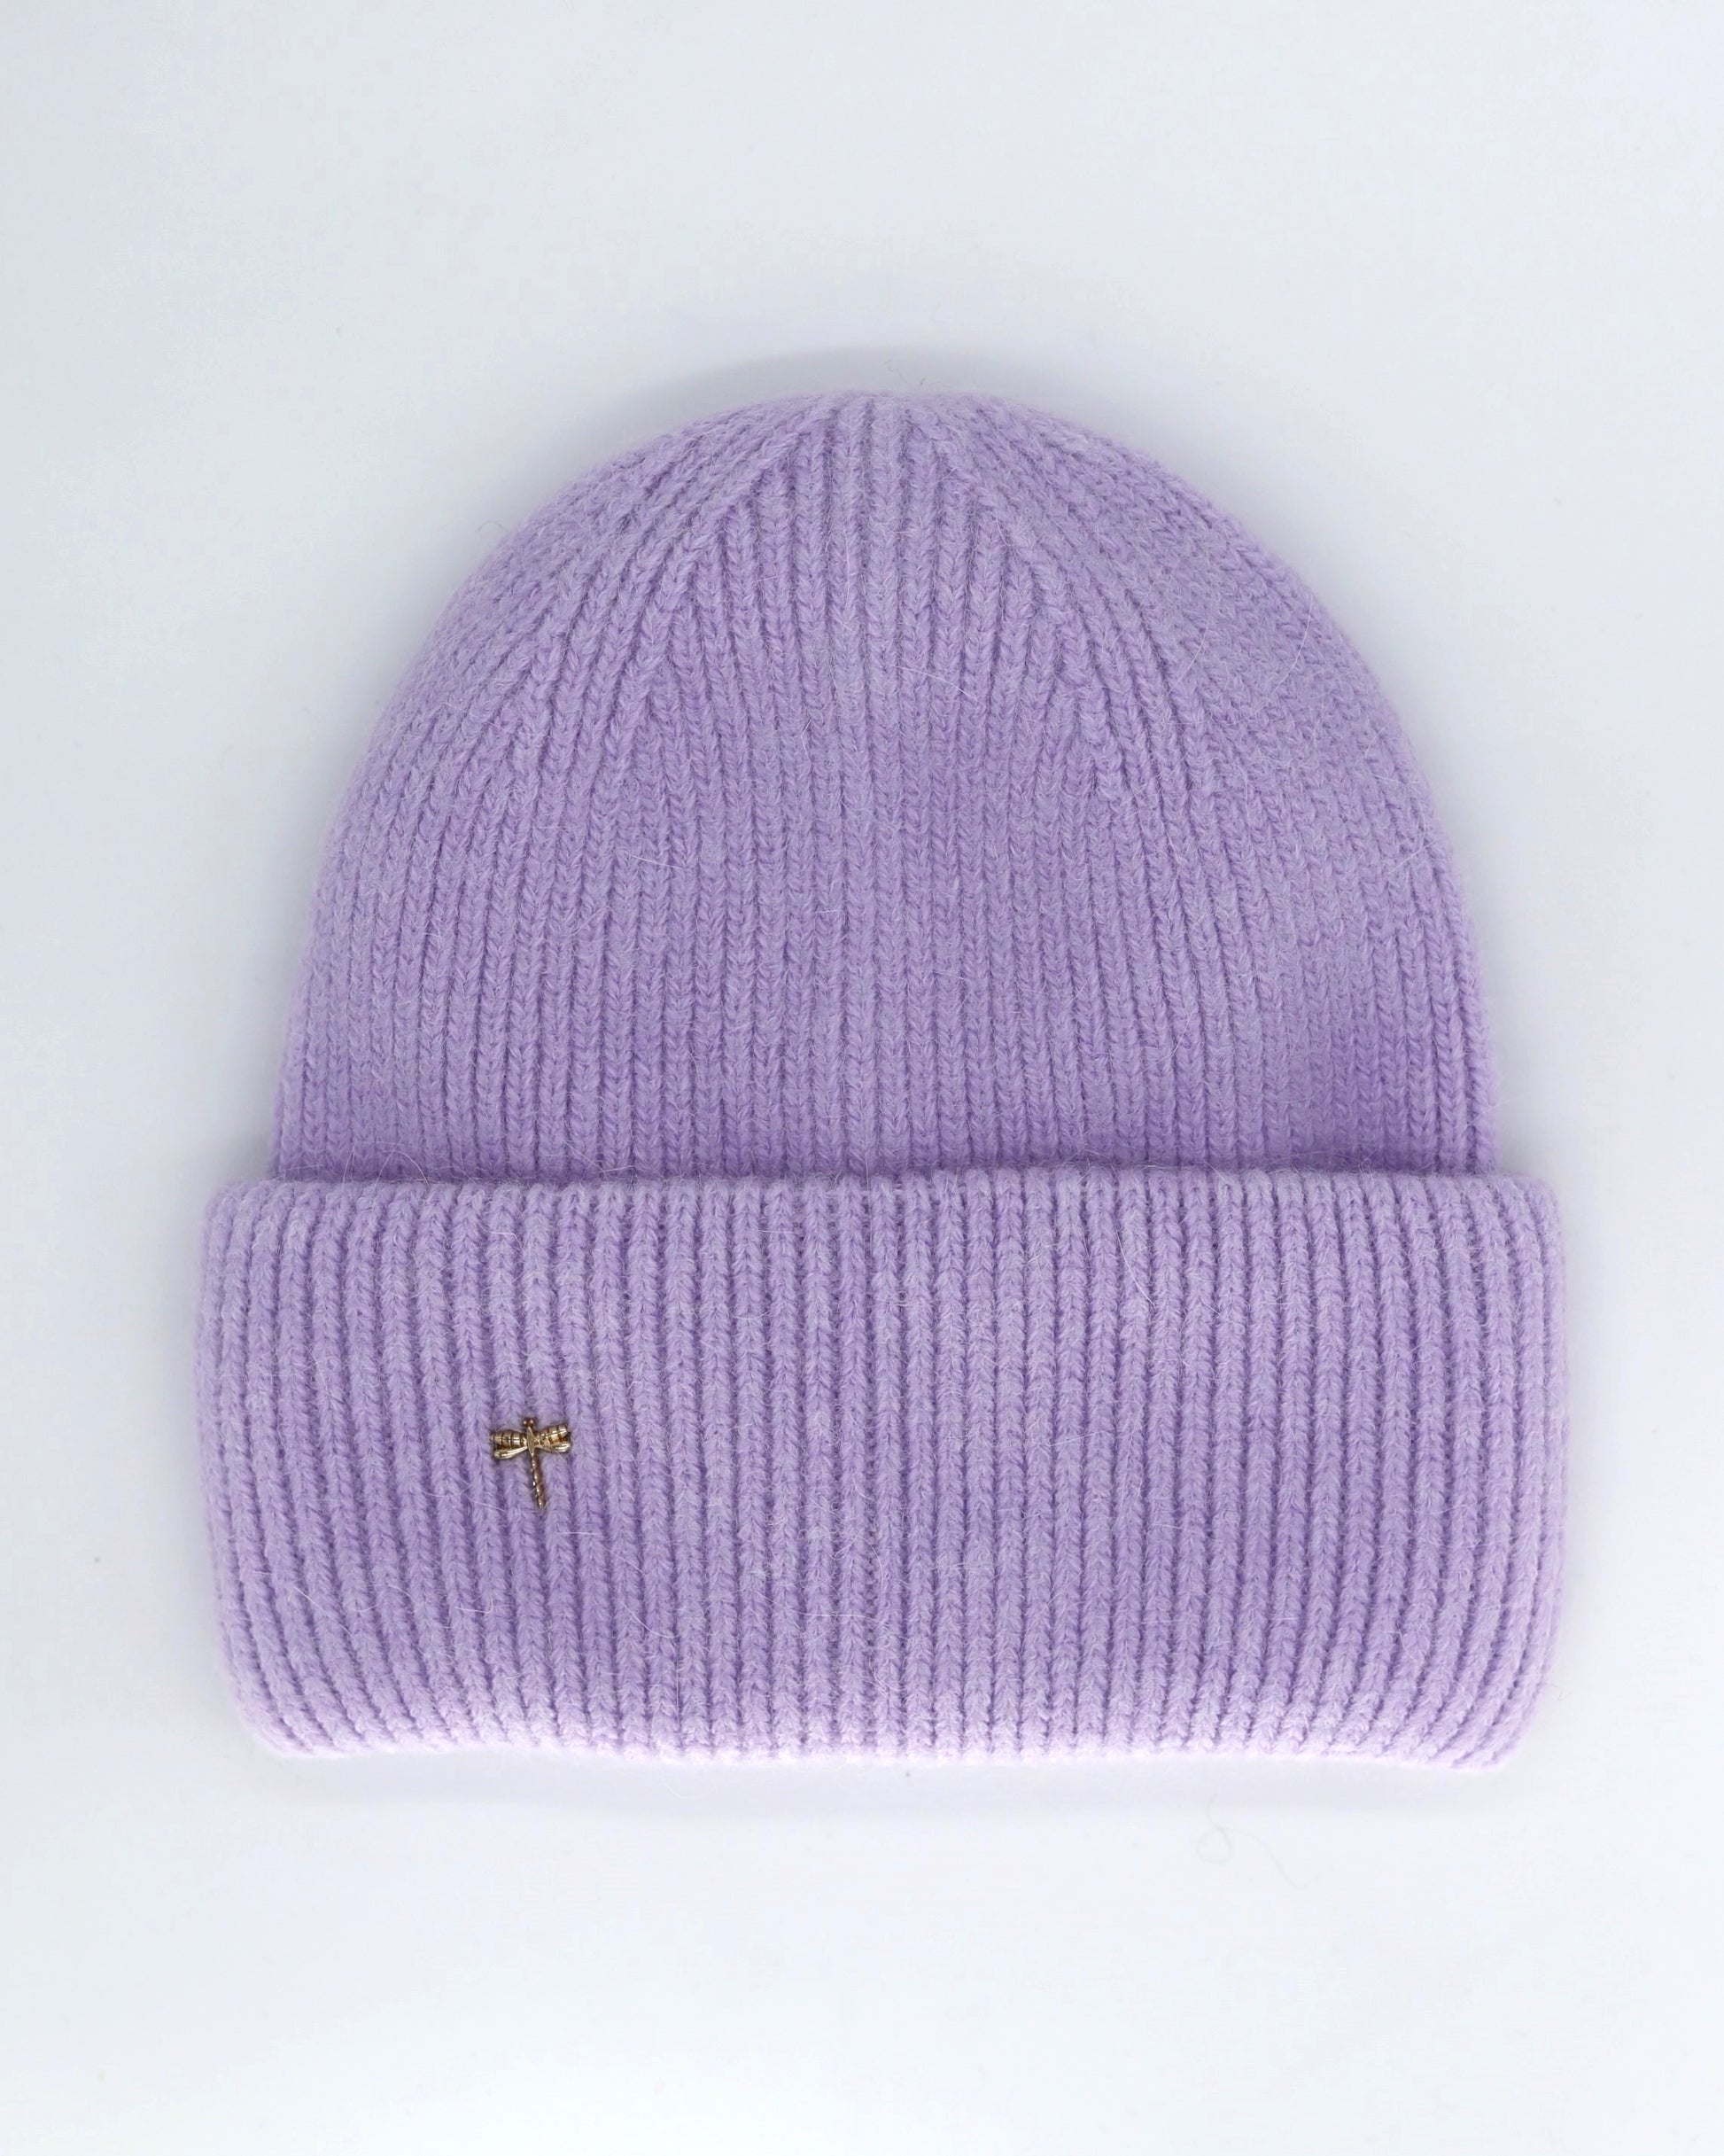 This Hat is a finest hat with a classic silhouette from Villanelle. A luxurious accessory for women made from the softest natural angora and sheep wool for extreme comfort and warmth. It is made in a trendy lavender color accompanied by an elegant pin. This product is sourced and manufactured in Poland.